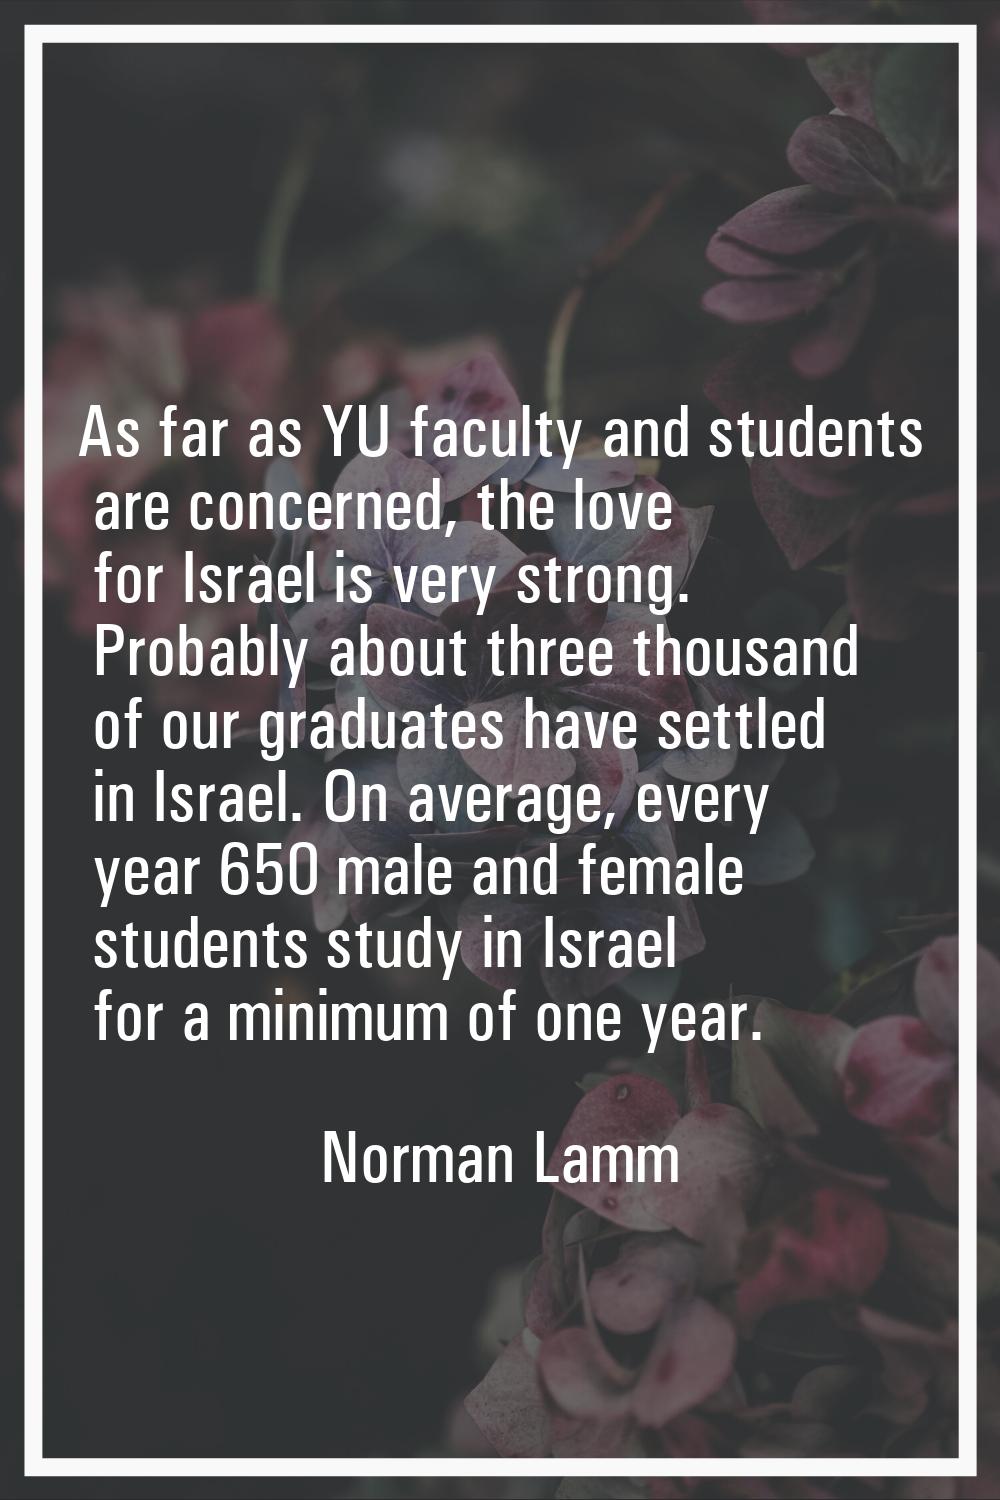 As far as YU faculty and students are concerned, the love for Israel is very strong. Probably about